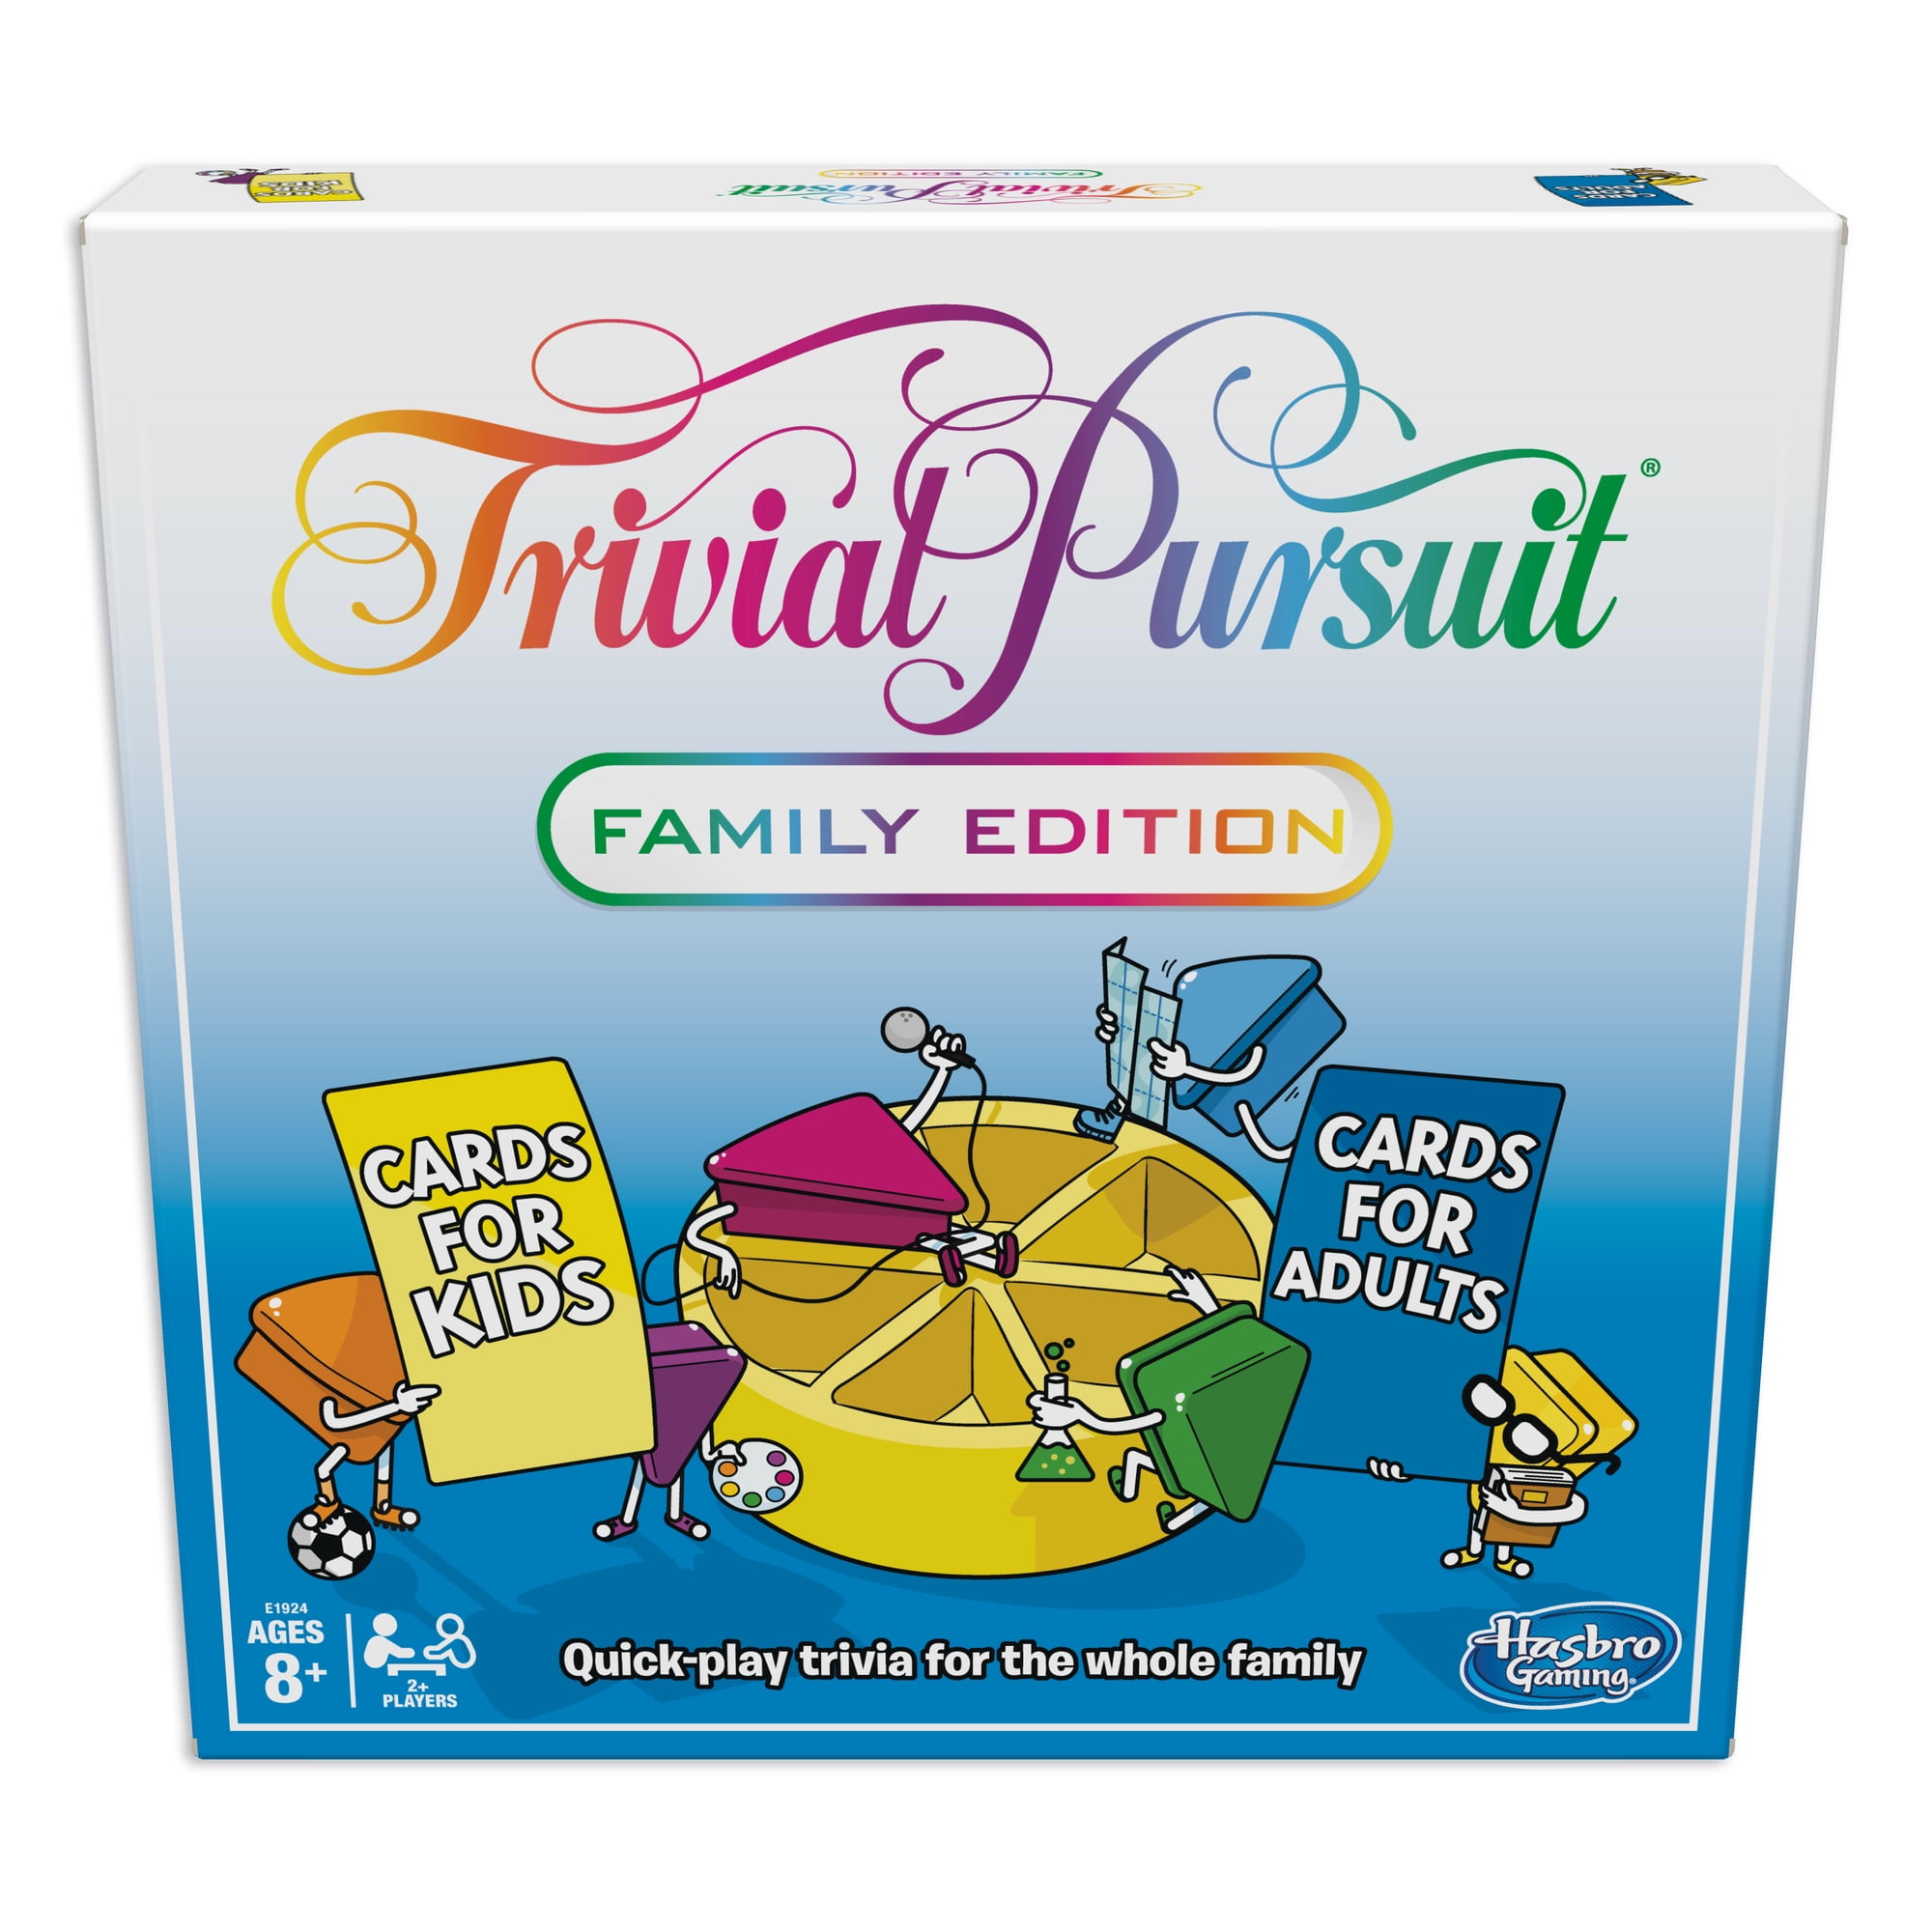 Trivial Pursuit Set of Wedges Cheese Movers Dice 4 Players Game Replacement 